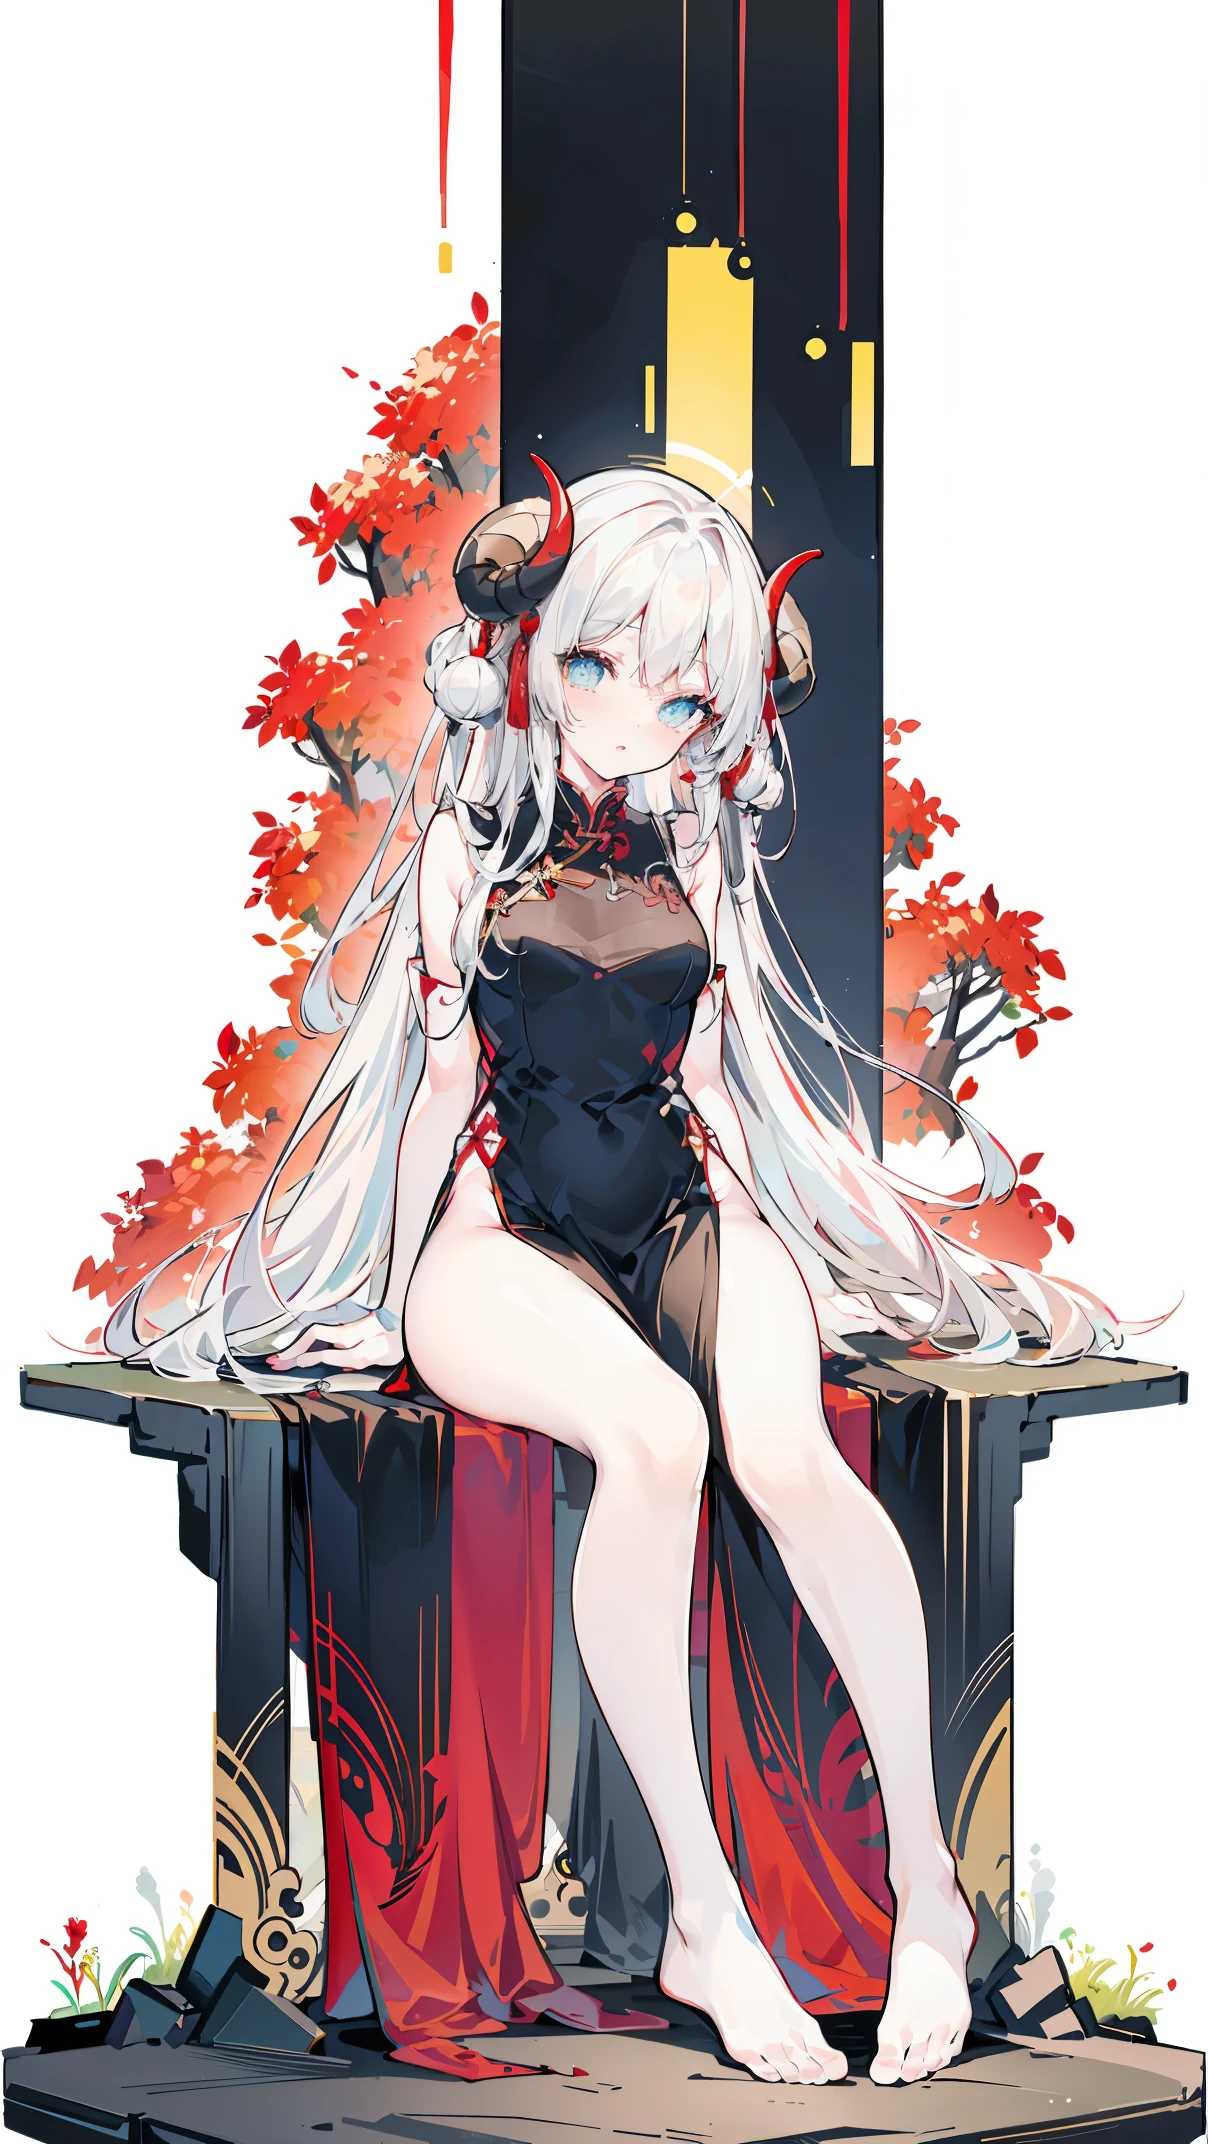 a girl，Sheep&#39;s horn, full color,  long white hair, Red eyes ，Eyeliner,  black transparent clothes, Red, open air, Rose, night, ruins, Butterfly，mine same as the original, mine, , (:1.2)
rest, (cheongsam), (view from below), (Put your arms behind your back), (wild lift), thin dress, Crotch cutout, best quality, high resolution, unified 8k wallpaper, (illustration:0.8), (Beautiful and delicate eyes:1.6), extremely detailed face, perfect lighting, Very detailed cg, (perfect hands, perfect anatomy),soles of feet，sitting，blond，red lips，Acting cute，Close-up of feet，up-close，Complete feet